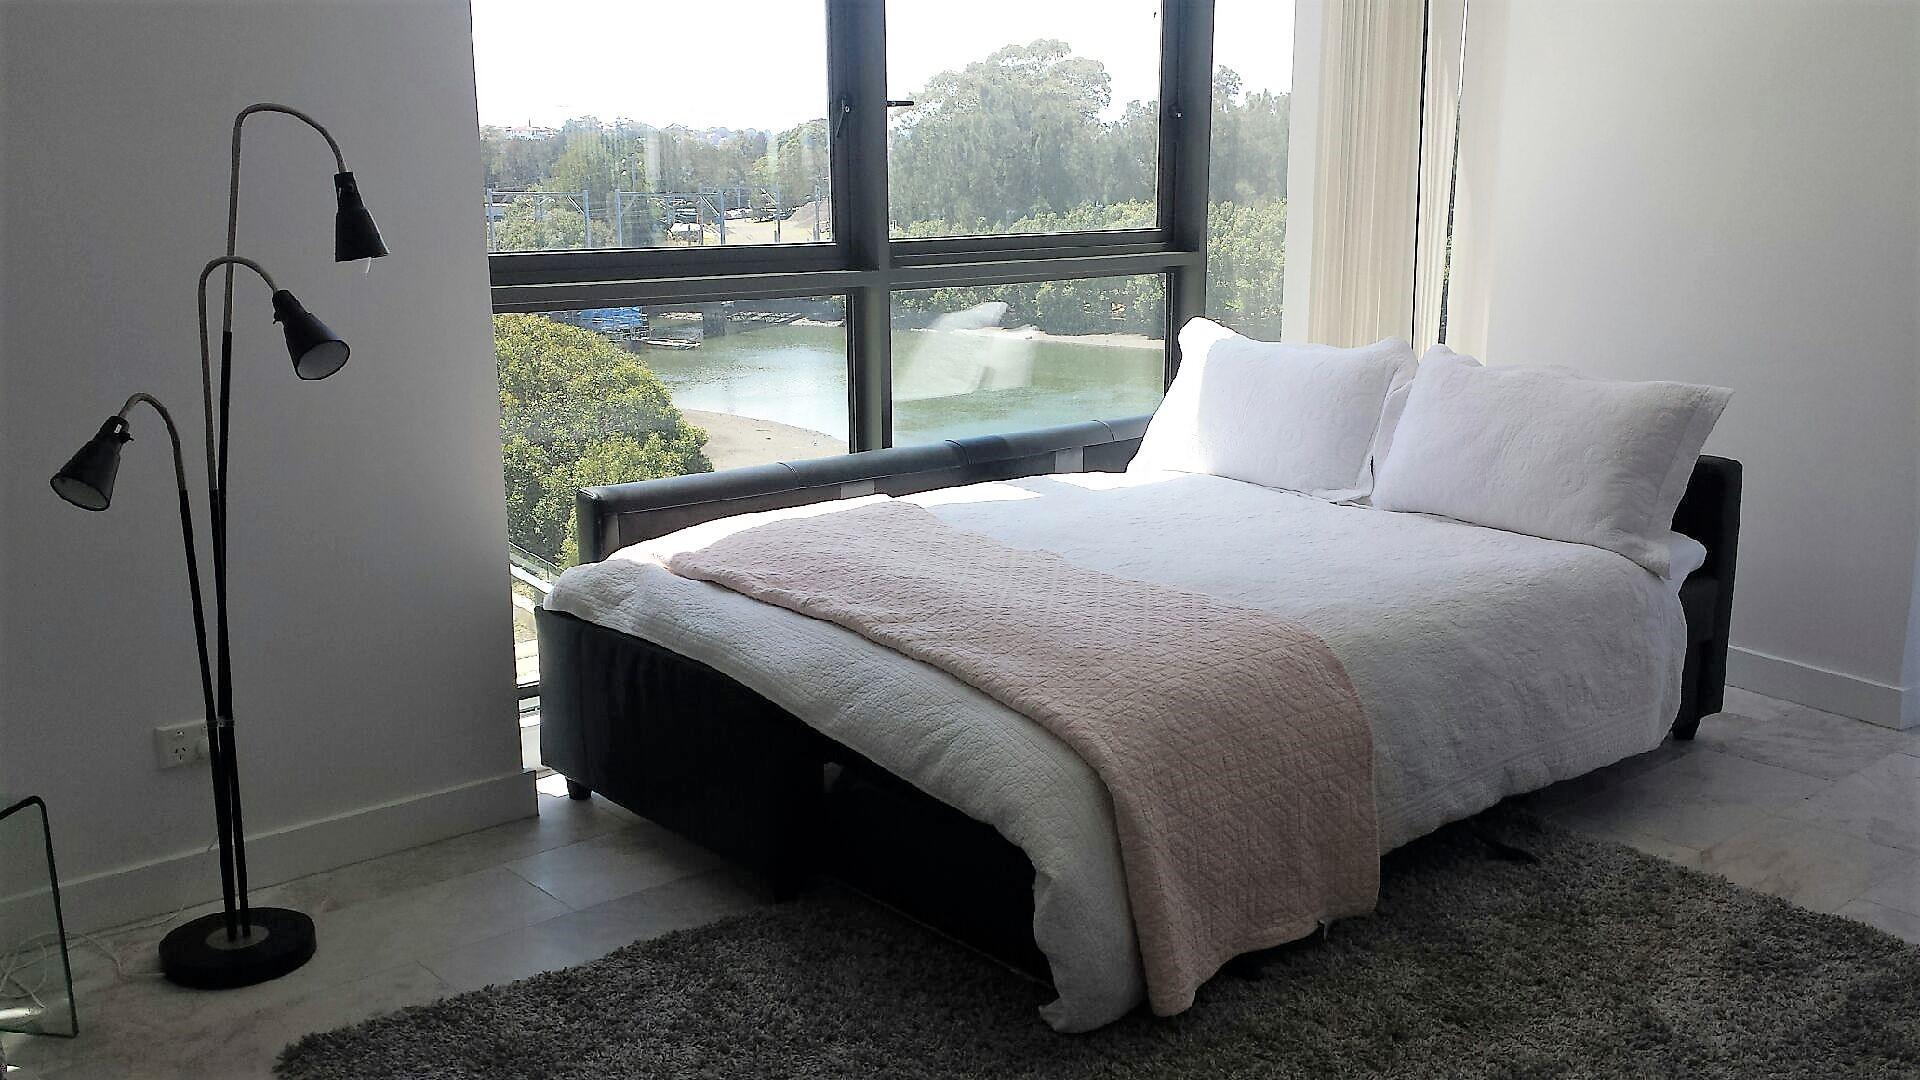 Bedroom 4, New exclusive apartment with water views, Rockdale